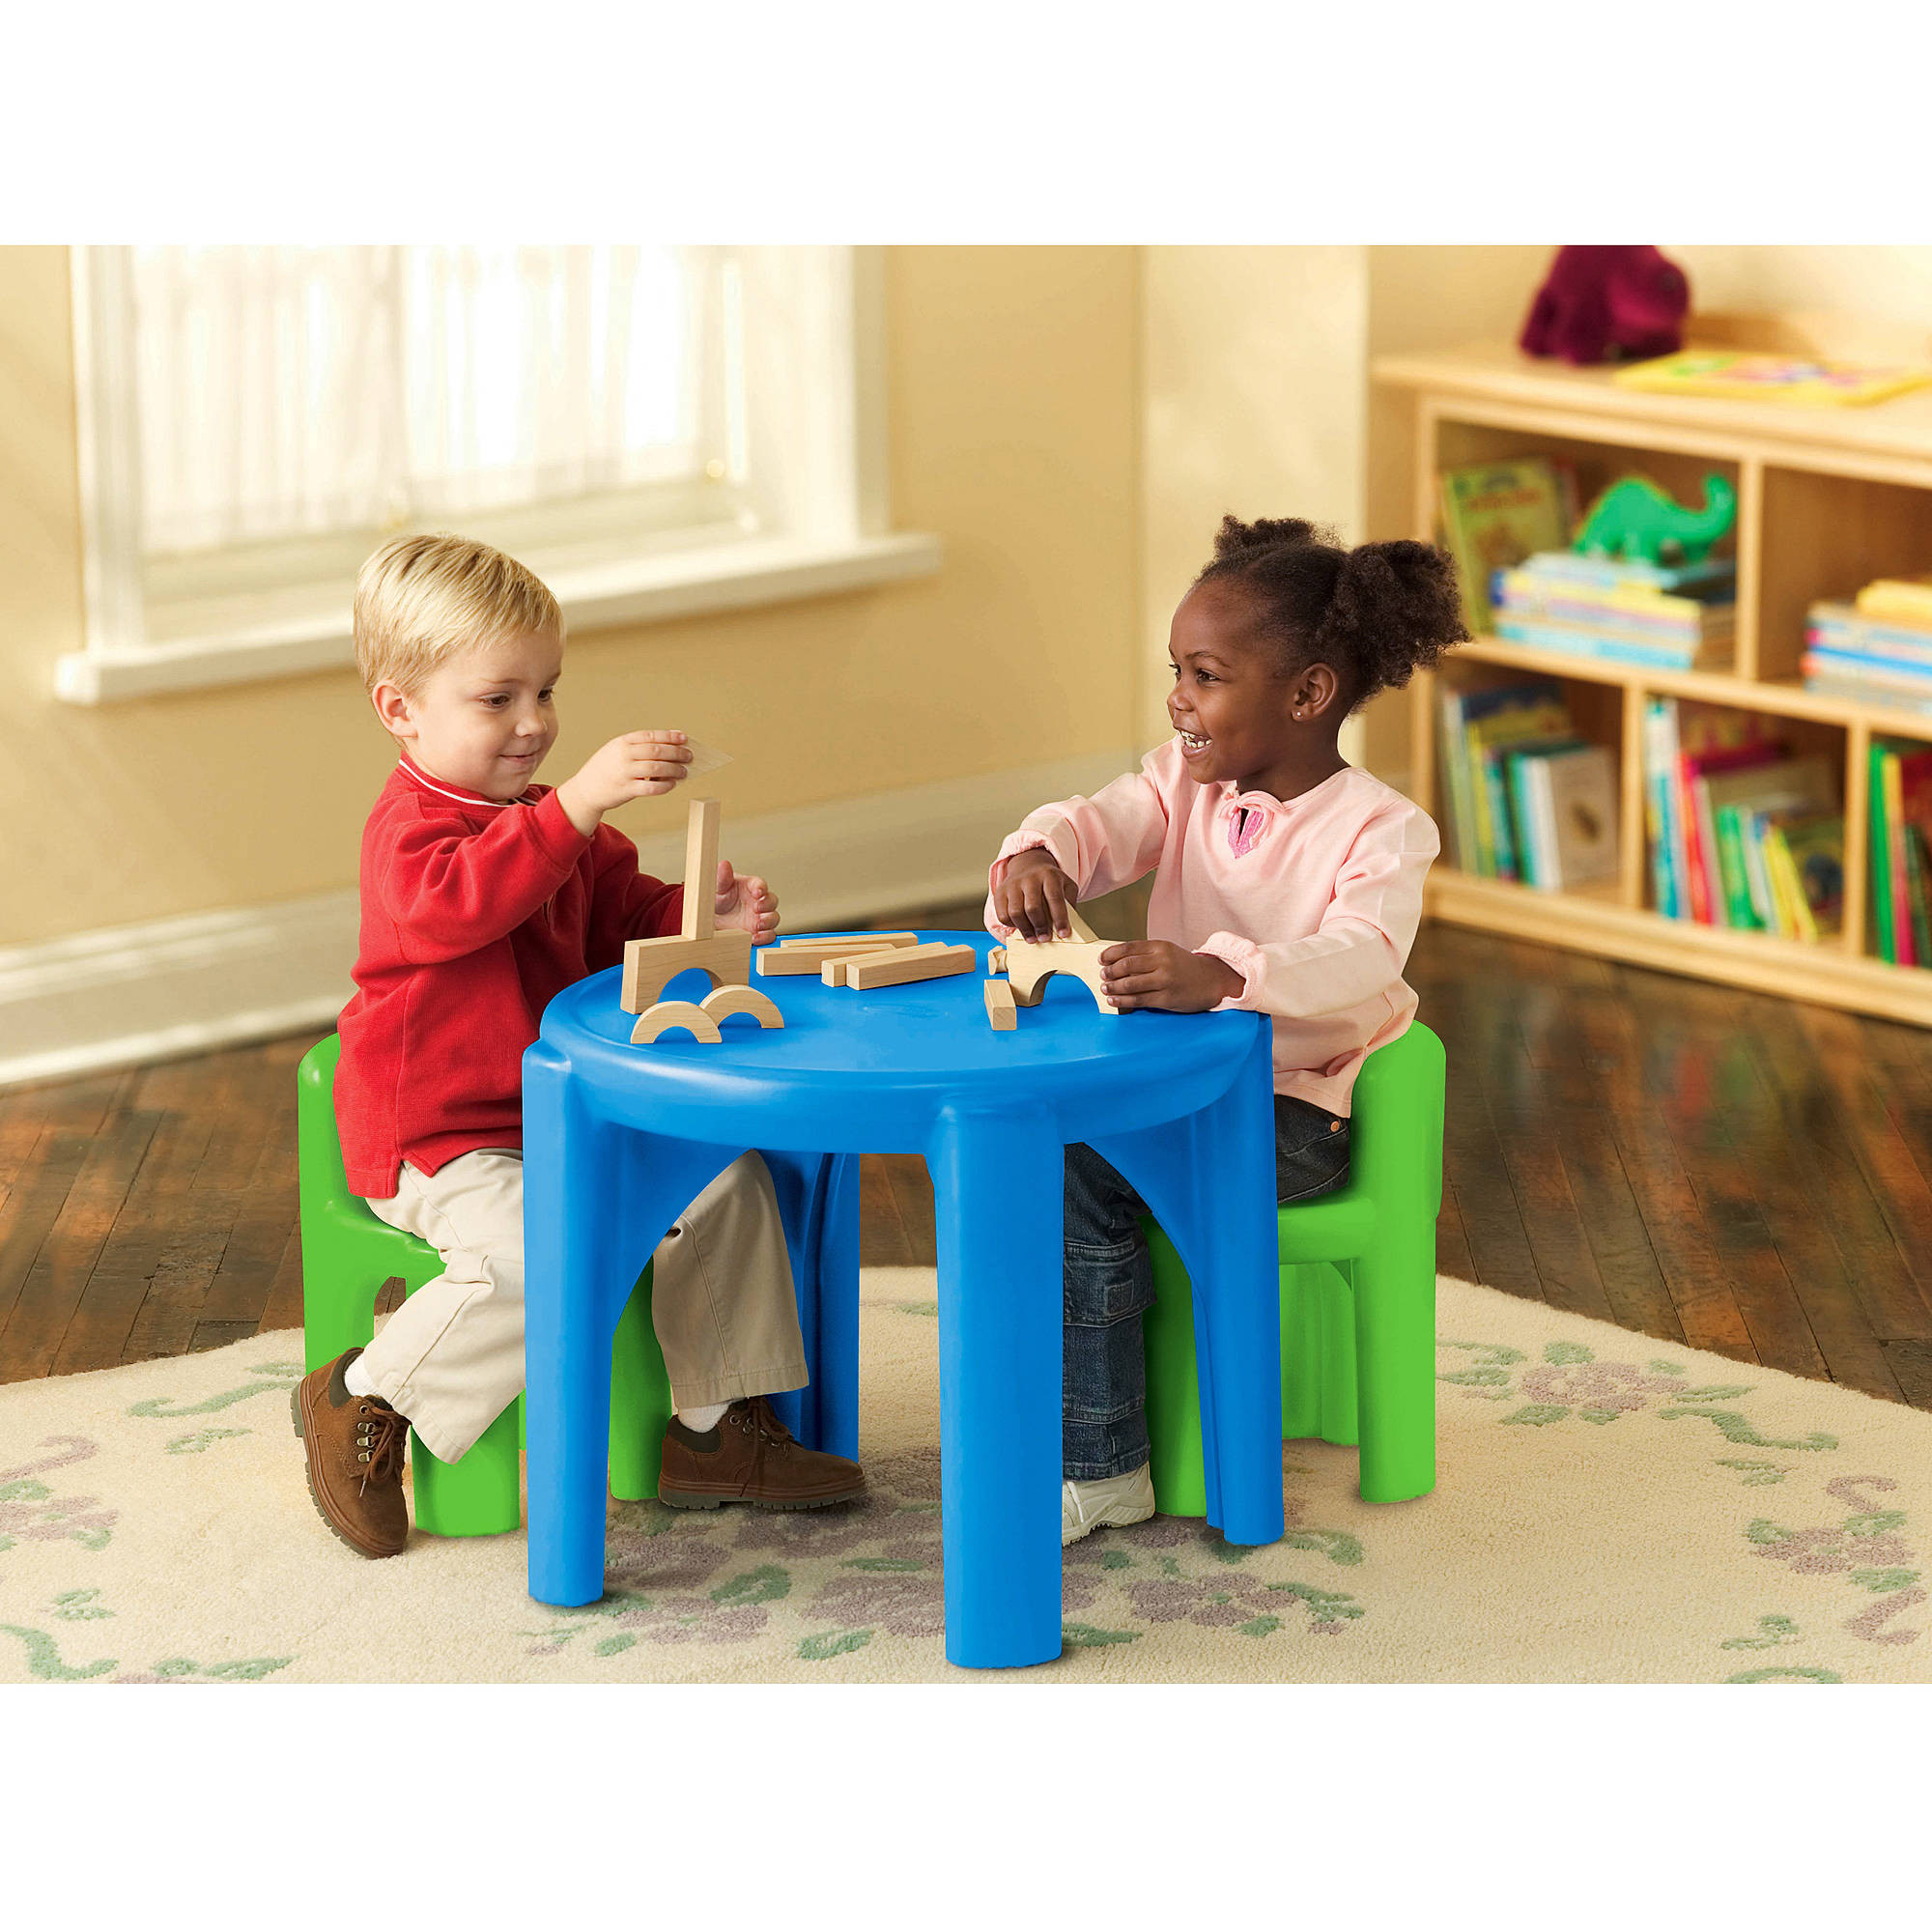 Little Kids Table And Chairs
 Little Tikes Table and Chair Set Multiple Colors Green